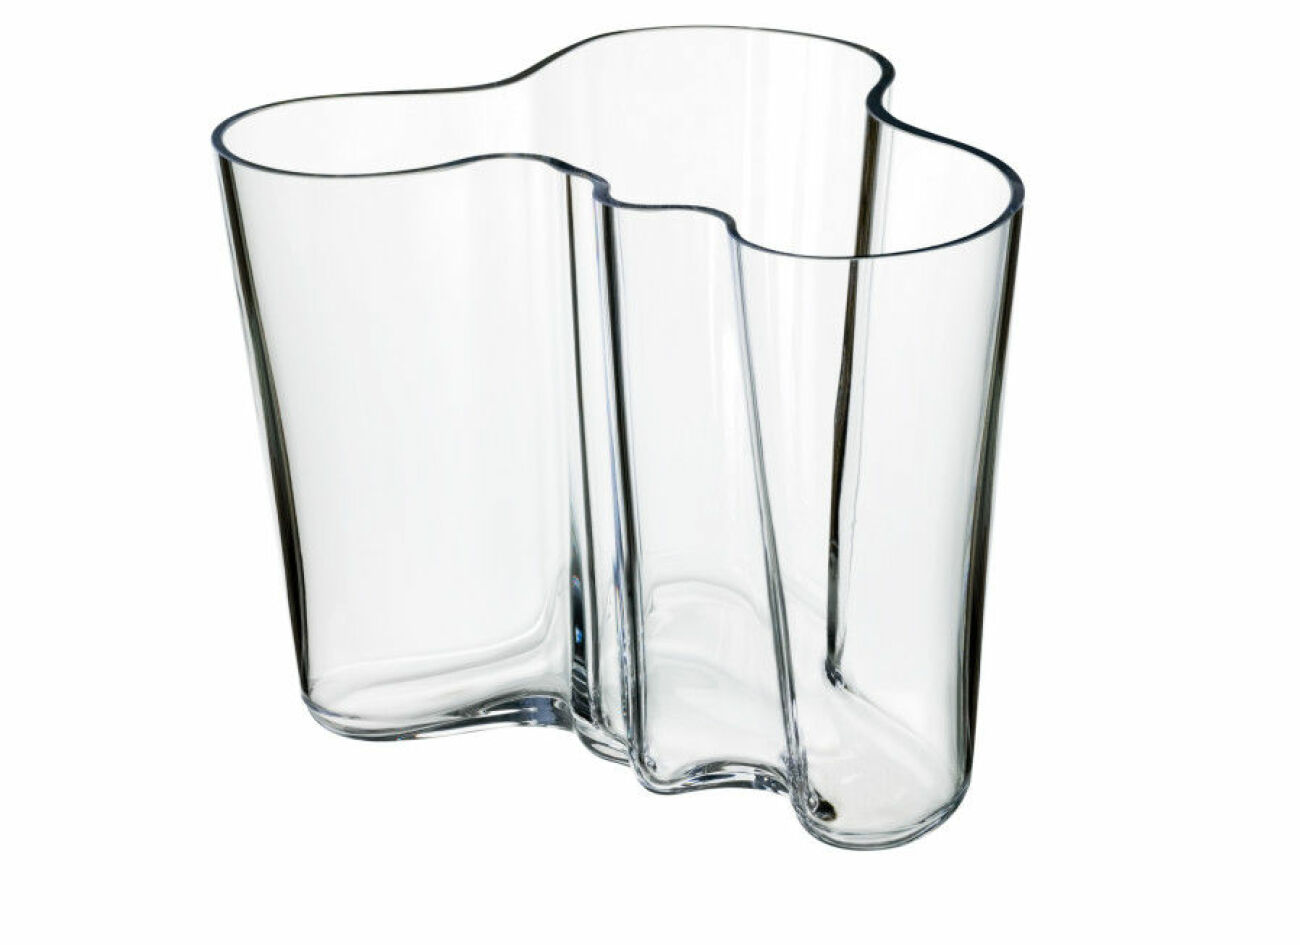 Aalto_vase_160mm_clear_1